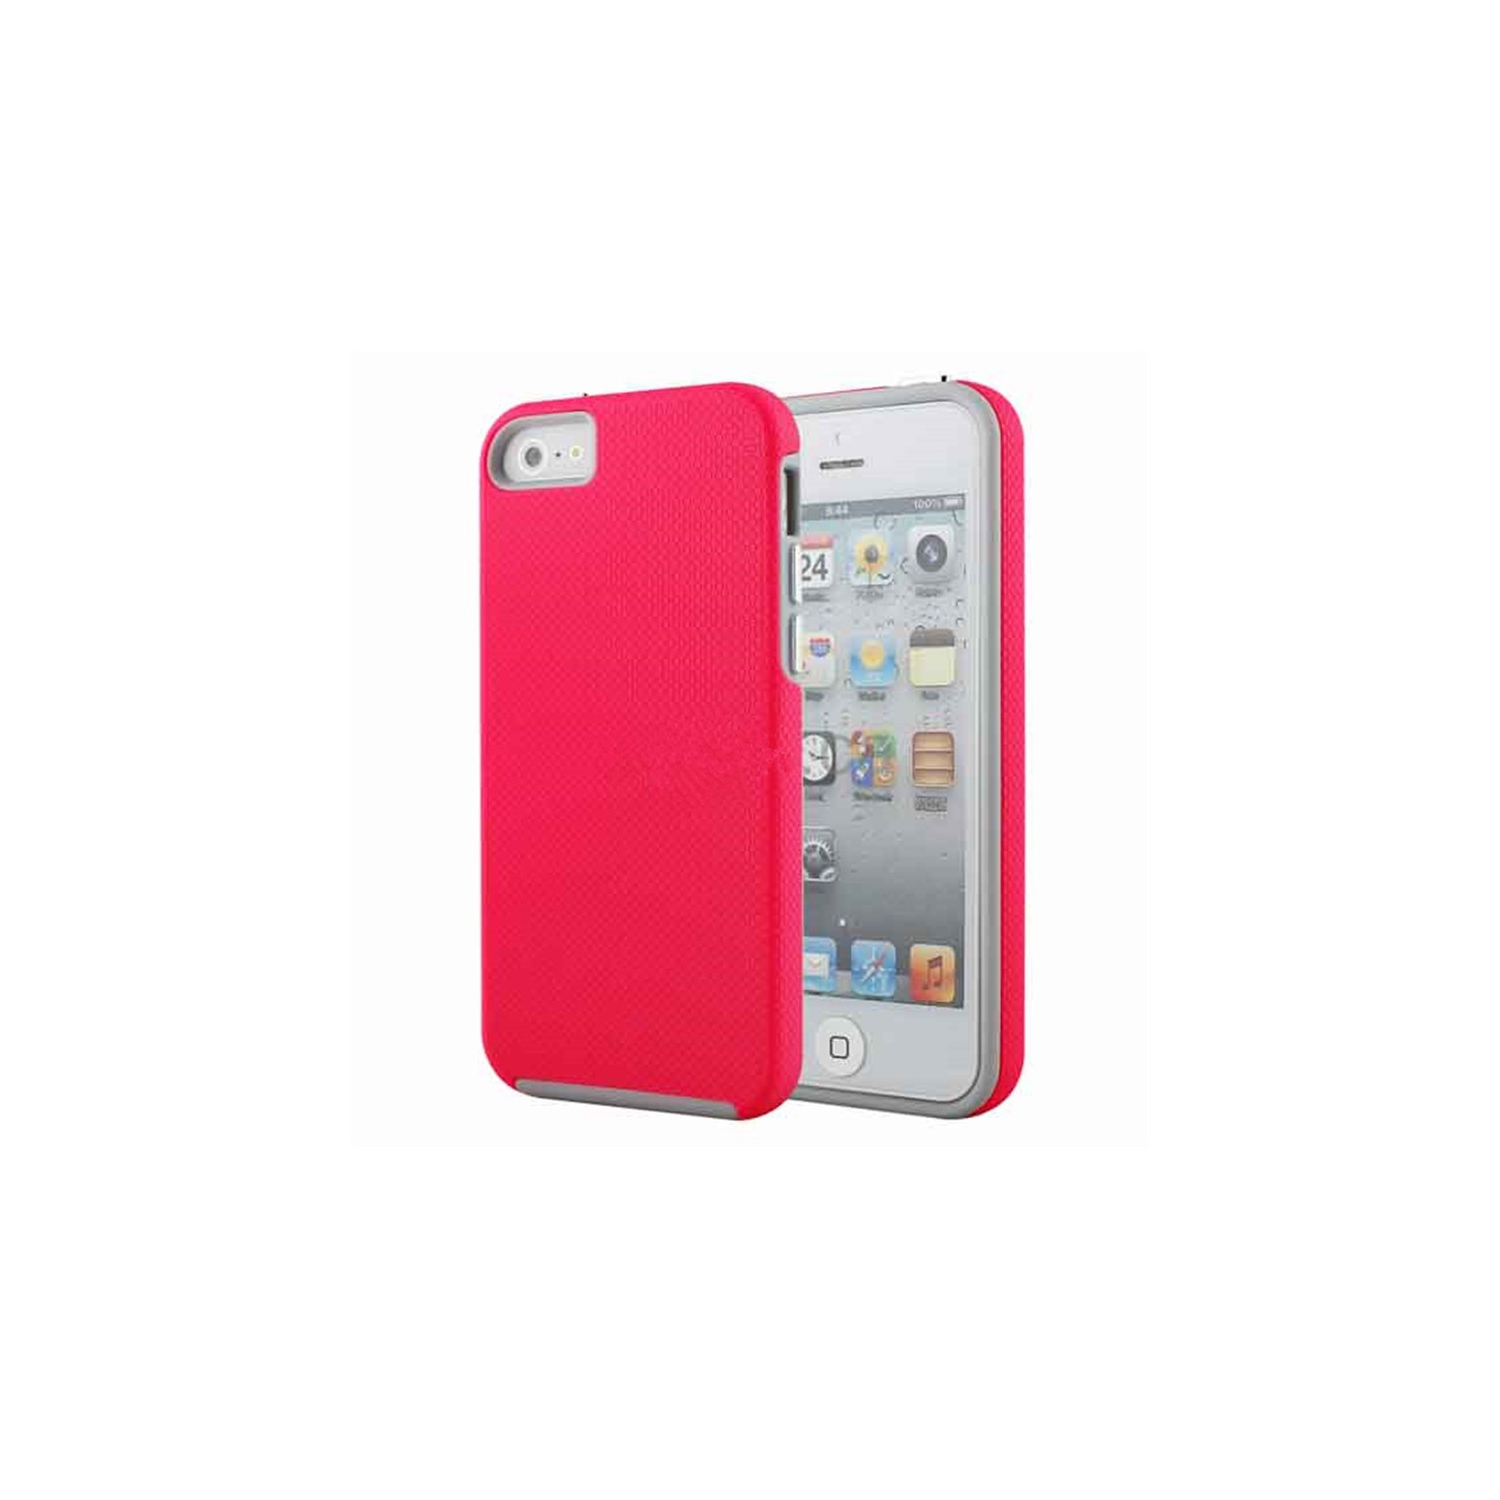 【CSmart】 Slim Fitted Hybrid Hard PC Shell Shockproof Scratch Resistant Case Cover for iPhone 5 / 5S / SE, Hot Pink